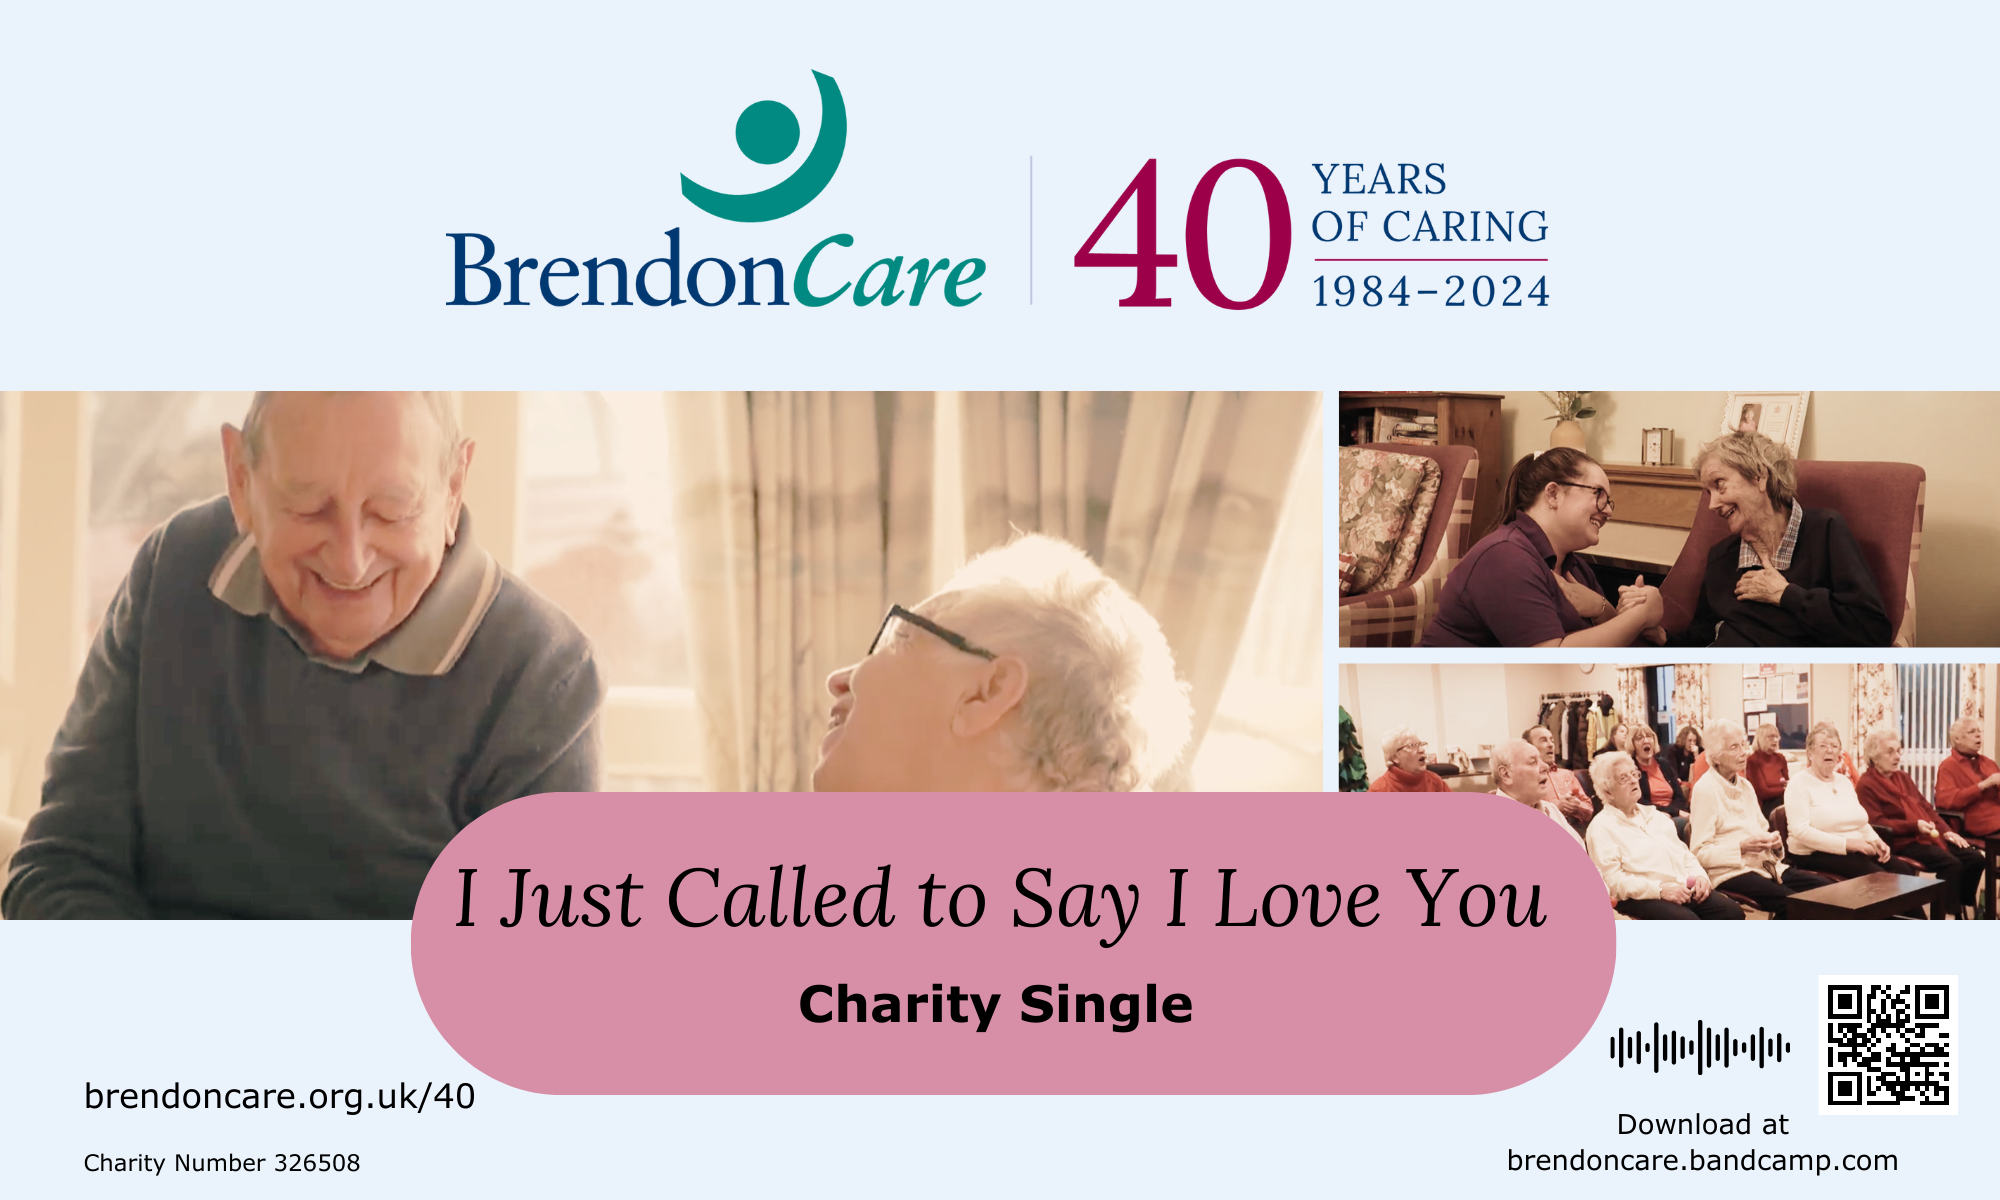 I Just Called To Say I Love You 40th Anniversary charity single conver